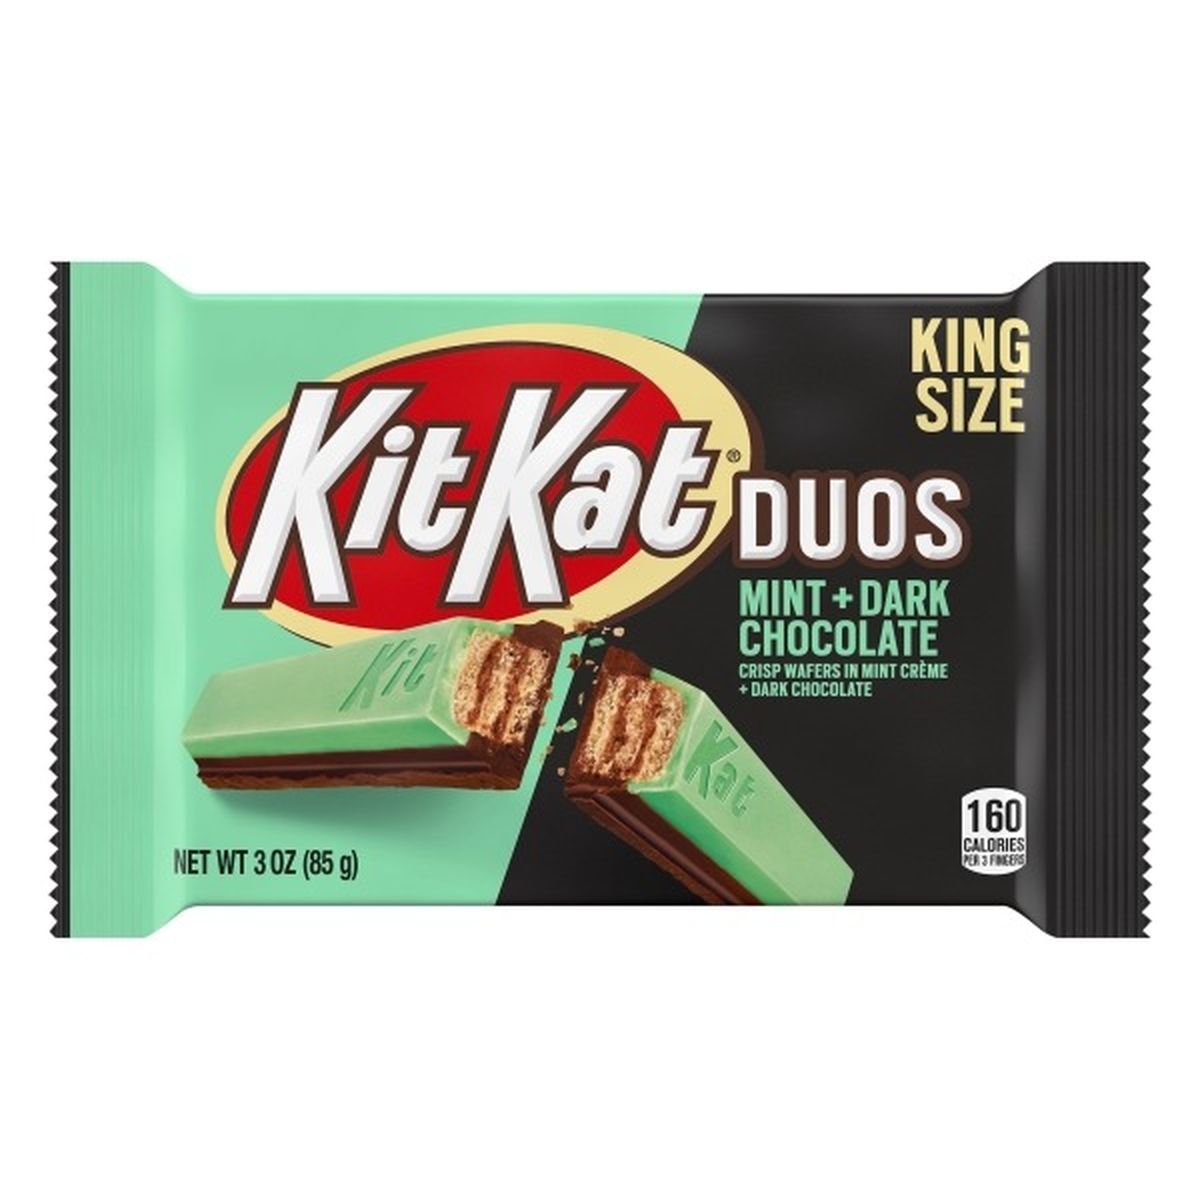 Calories in Kit Kat Wafers, Mint + Dark Chocolate, Duos, King Size